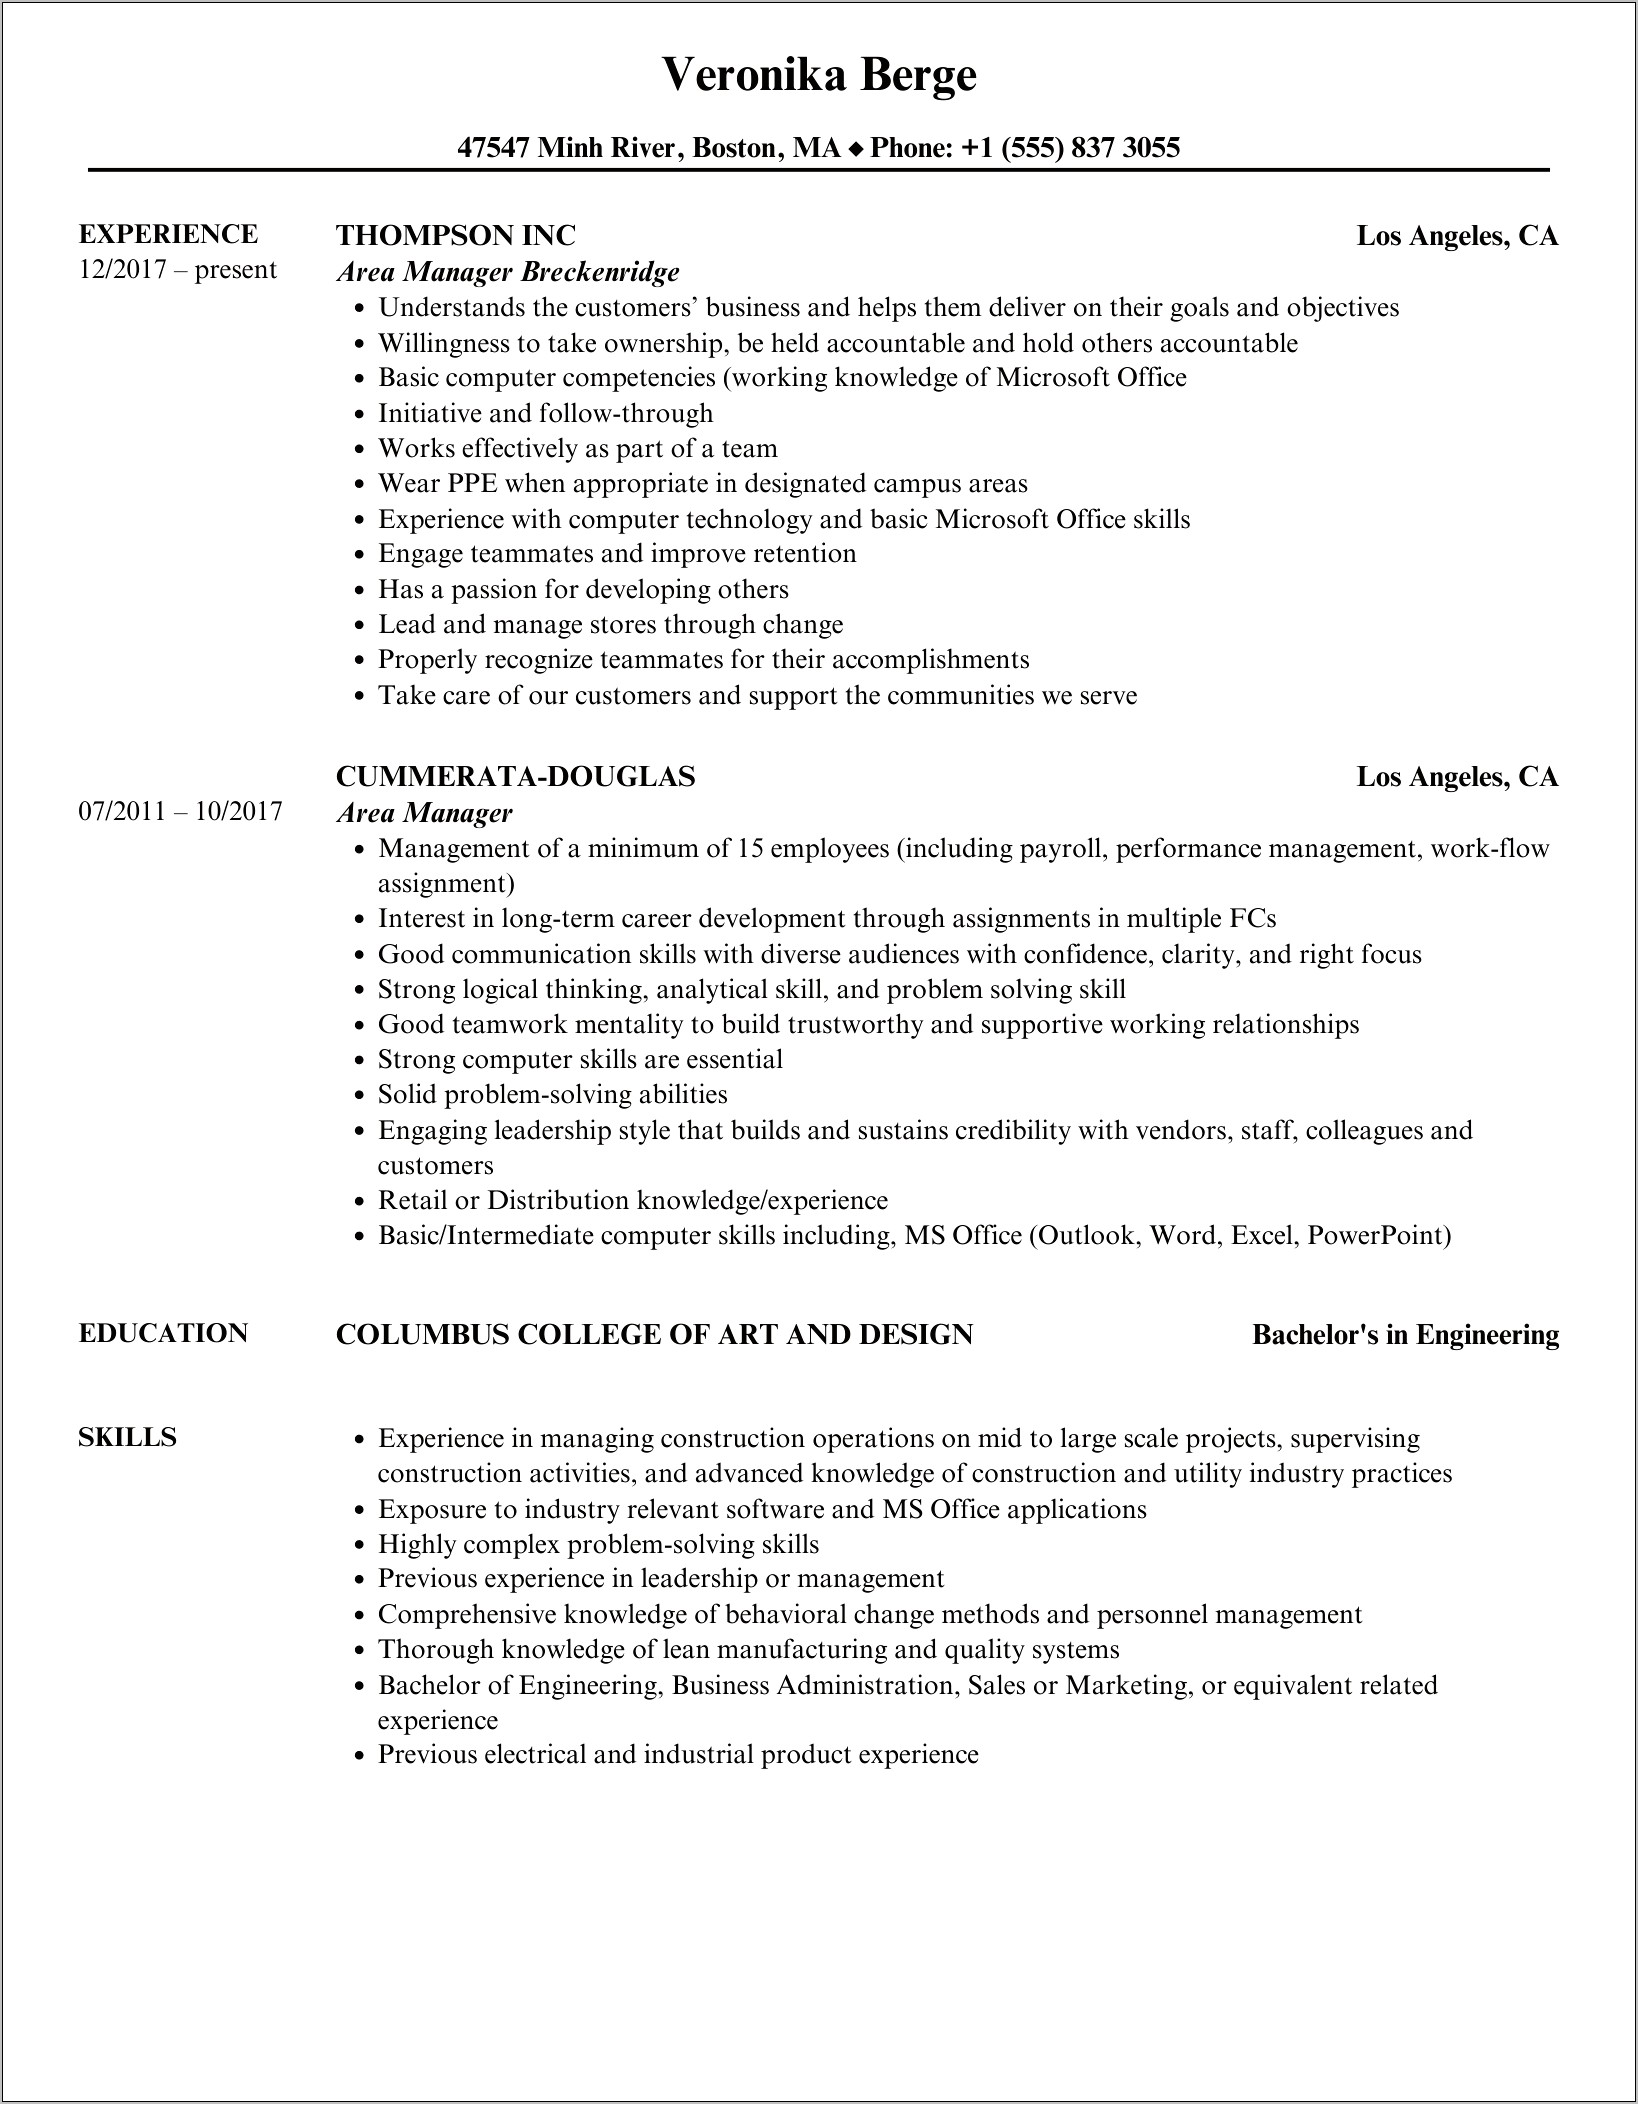 Area Manager Skills For Resume